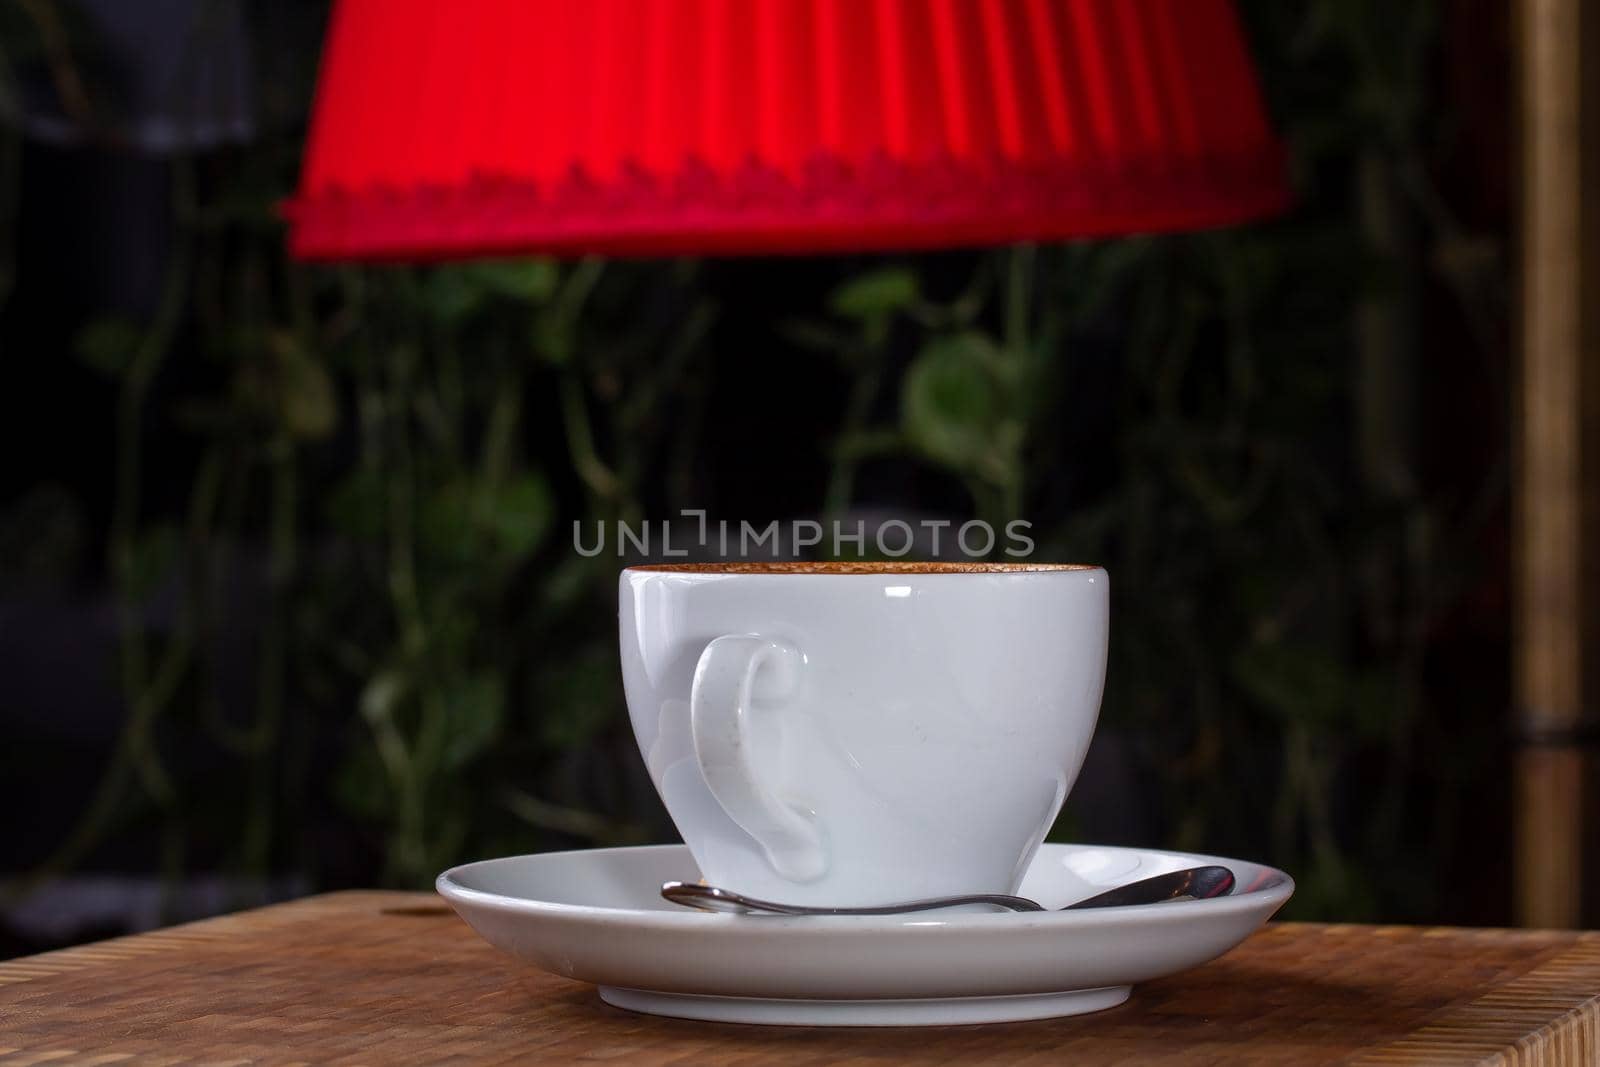 A cup of cappuccino coffee stands on the table at night under a red lampshade.